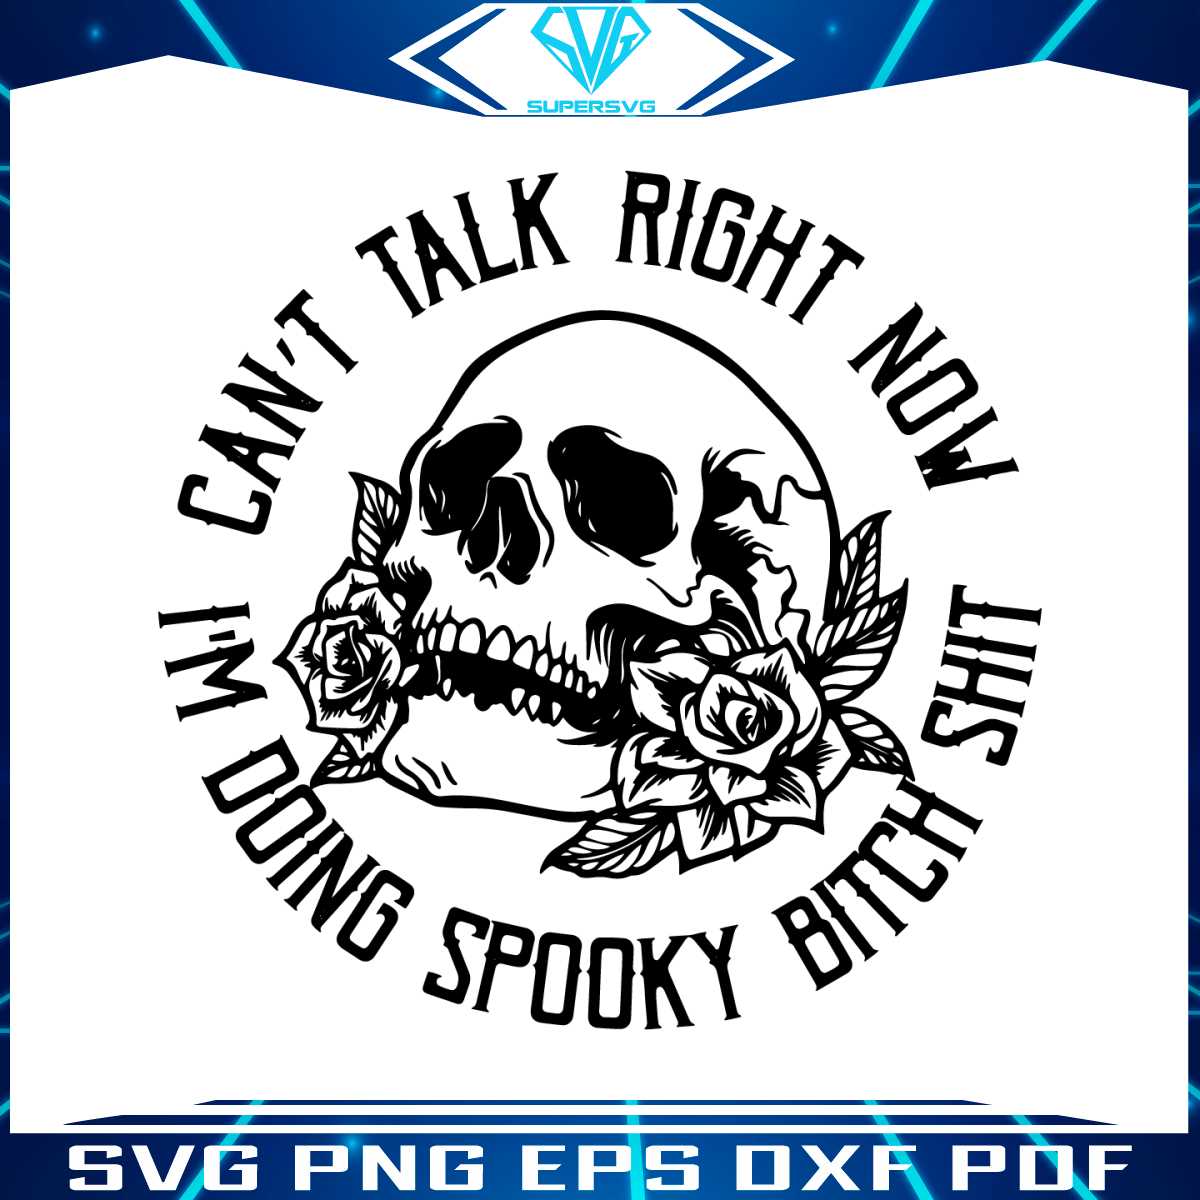 cant-talk-right-now-doing-spooky-bitch-shit-svg-download